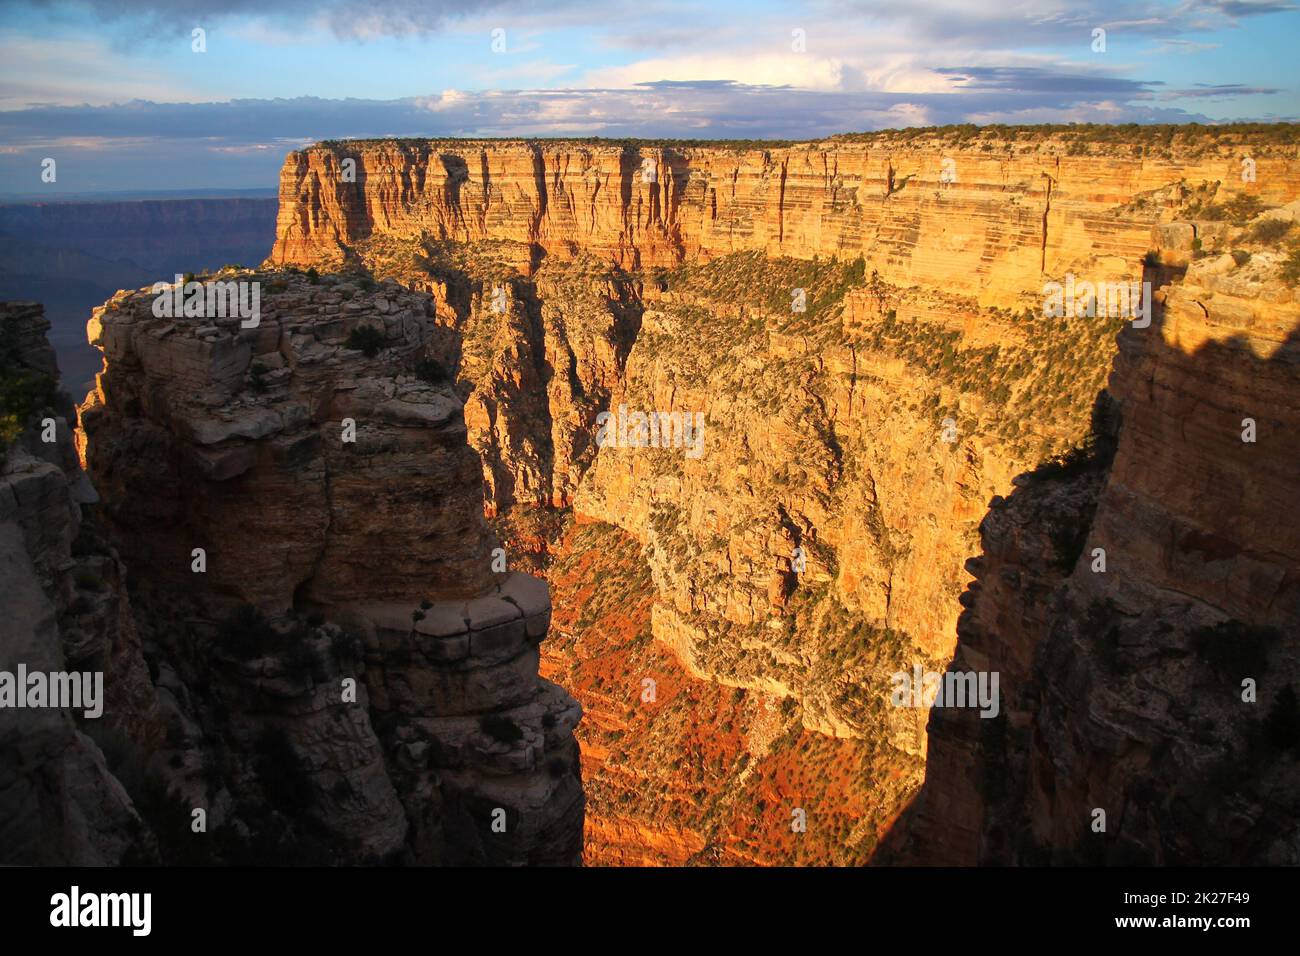 A stratification wall during a orange sunrise in the Grand Canyon National Park Stock Photo